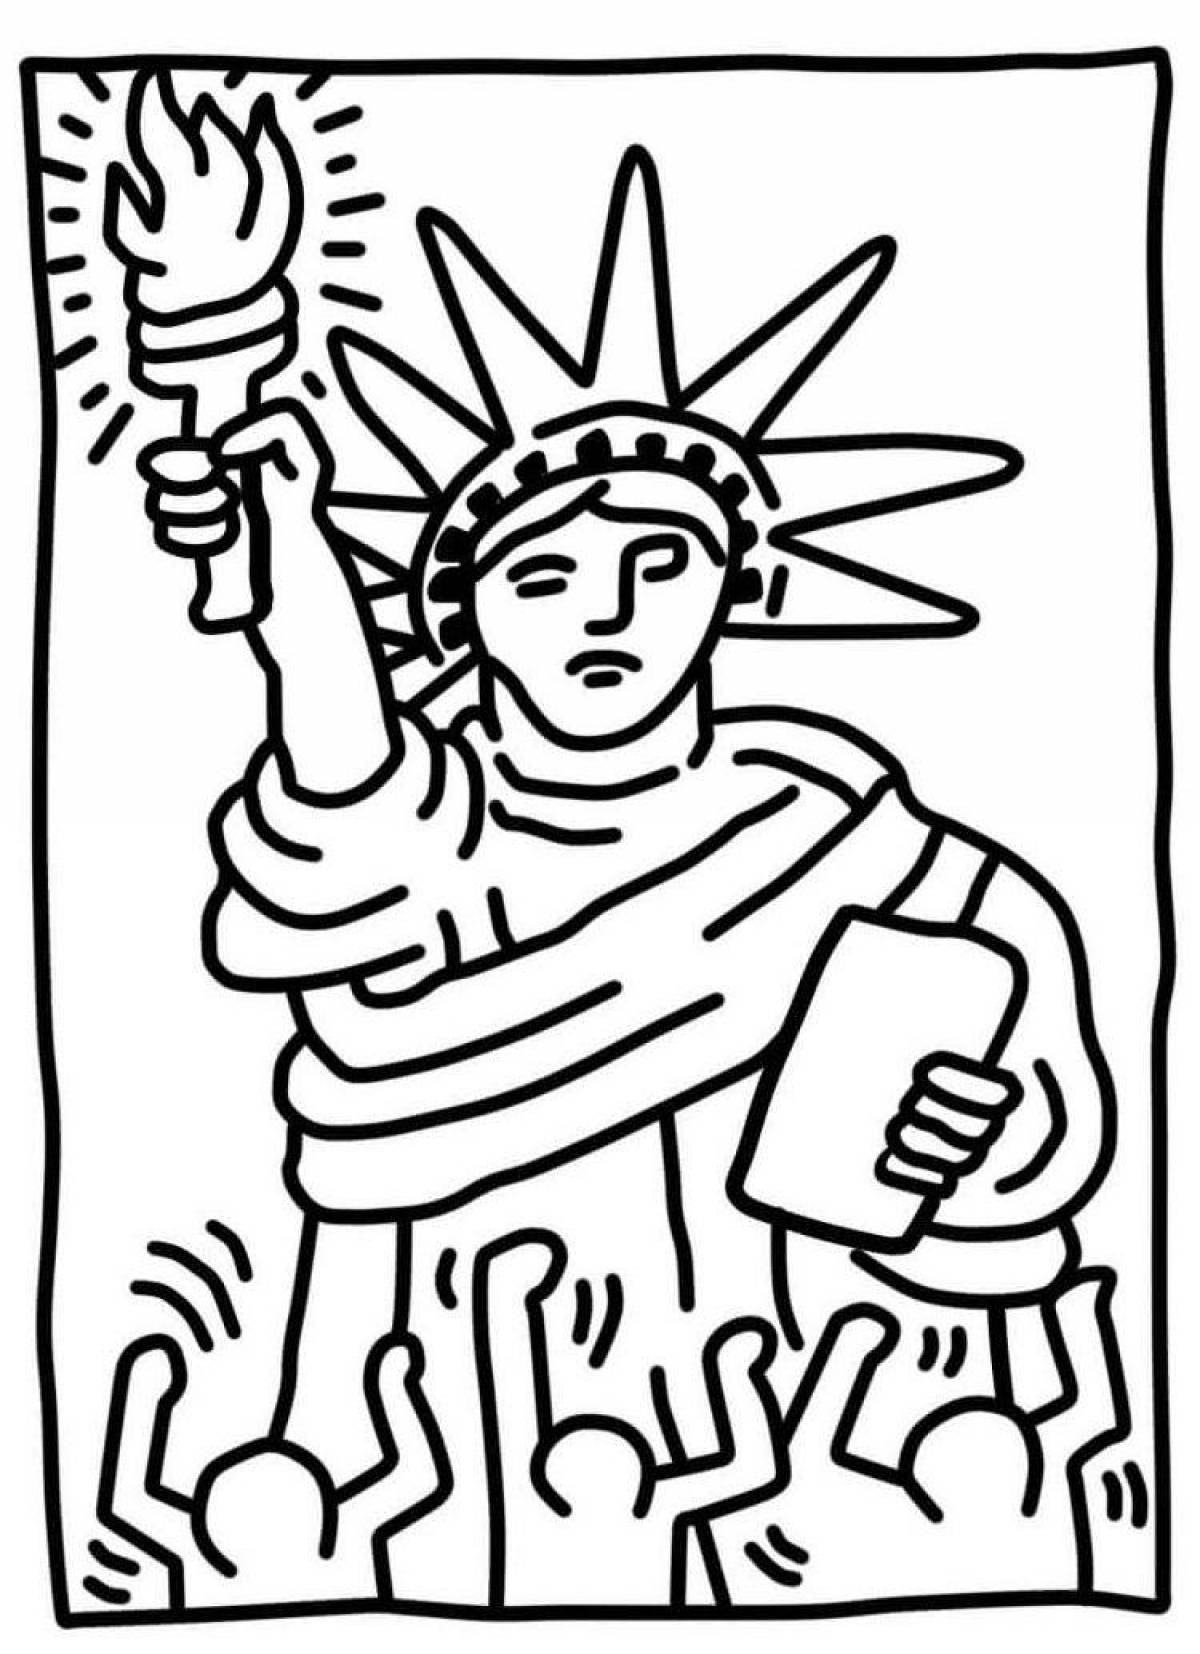 Impressive statue of liberty coloring page